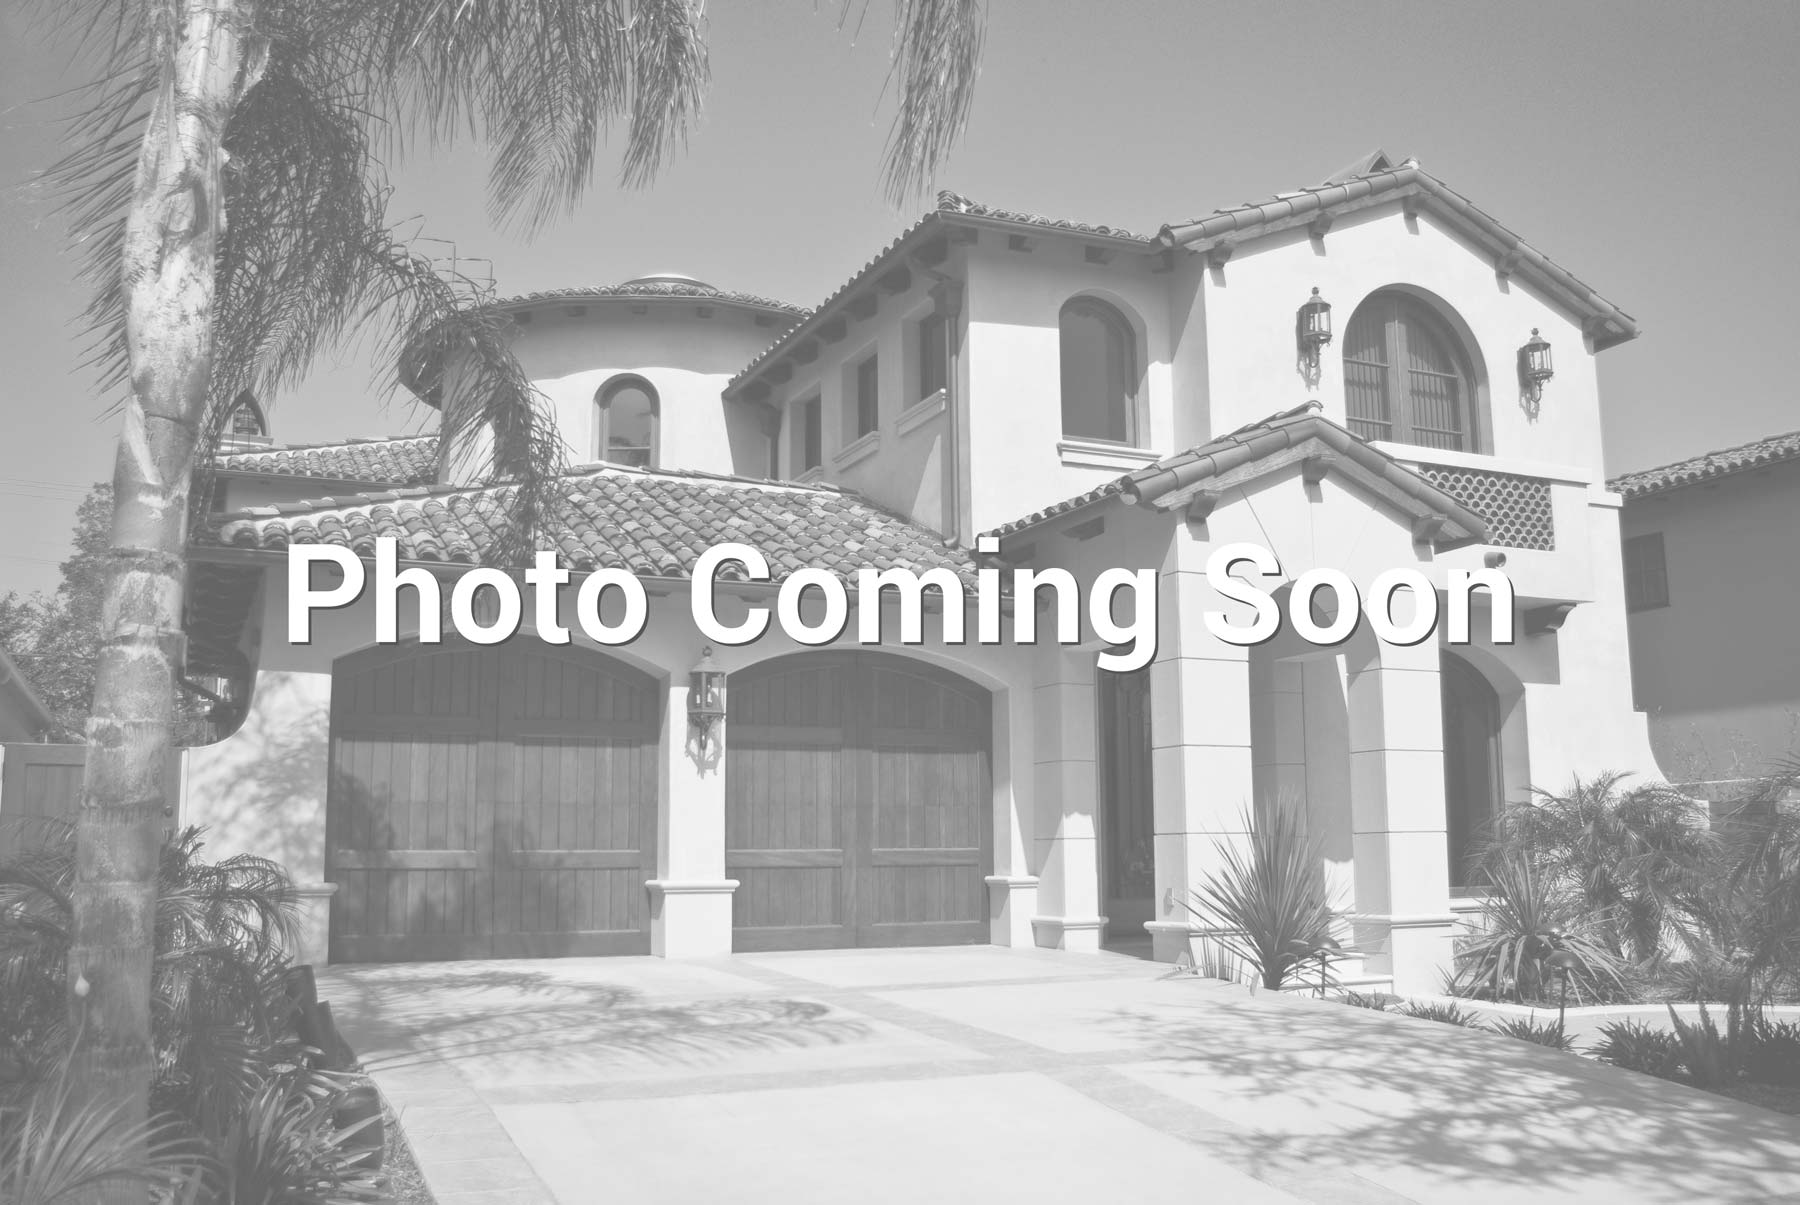 $1,050,000 - 5Br/3Ba -  for Sale in Rancho Cucamonga